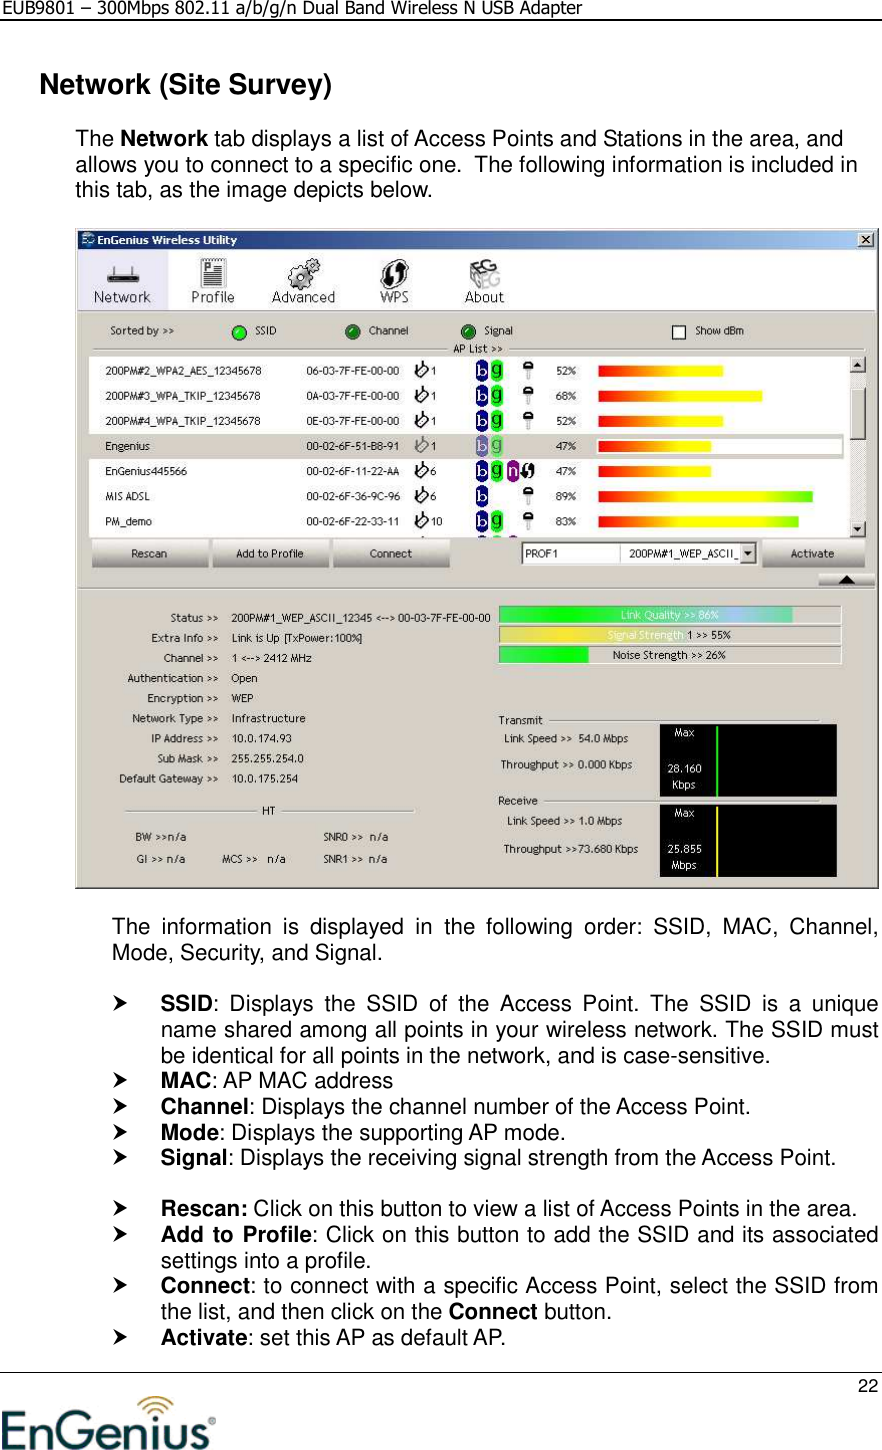 EUB9801 – 300Mbps 802.11 a/b/g/n Dual Band Wireless N USB Adapter     22    Network (Site Survey) The Network tab displays a list of Access Points and Stations in the area, and allows you to connect to a specific one.  The following information is included in this tab, as the image depicts below.    The  information  is  displayed  in  the  following  order:  SSID,  MAC,  Channel, Mode, Security, and Signal.   SSID:  Displays  the  SSID  of  the  Access  Point.  The  SSID  is  a  unique name shared among all points in your wireless network. The SSID must be identical for all points in the network, and is case-sensitive.  MAC: AP MAC address  Channel: Displays the channel number of the Access Point.  Mode: Displays the supporting AP mode.  Signal: Displays the receiving signal strength from the Access Point.    Rescan: Click on this button to view a list of Access Points in the area.  Add to Profile: Click on this button to add the SSID and its associated settings into a profile.   Connect: to connect with a specific Access Point, select the SSID from the list, and then click on the Connect button.  Activate: set this AP as default AP. 